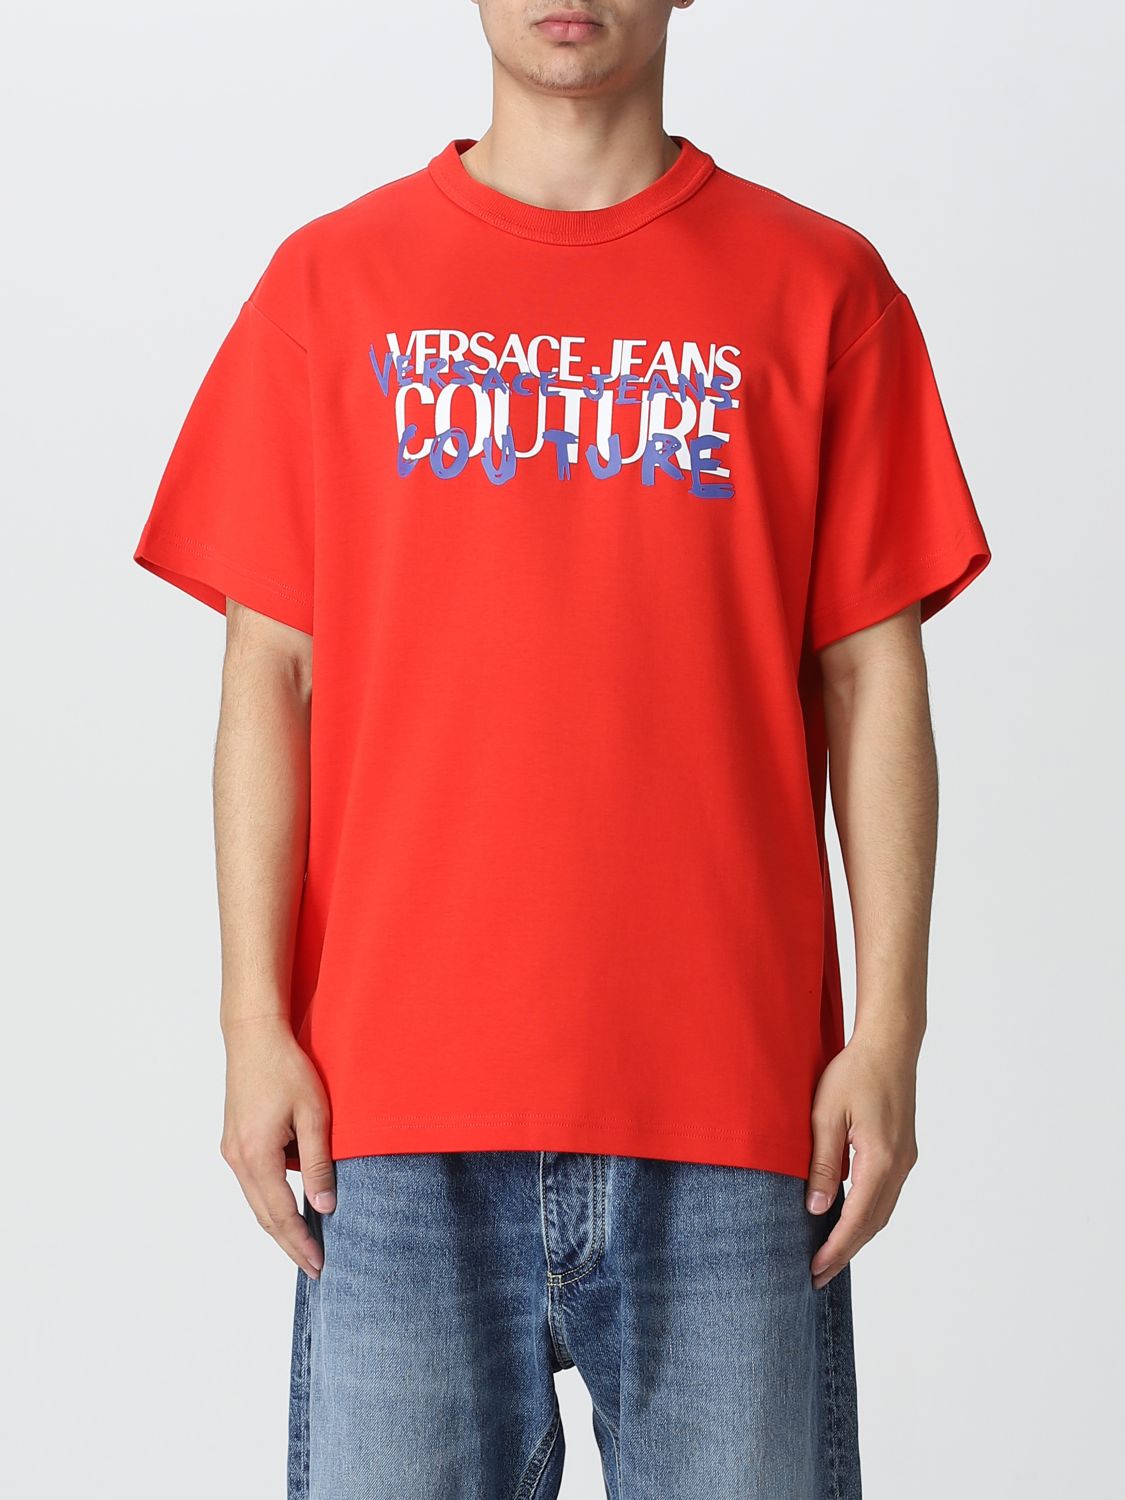 VERSACE JEANS COUTURE: cotton t-shirt - Red | Versace Jeans Couture t ...